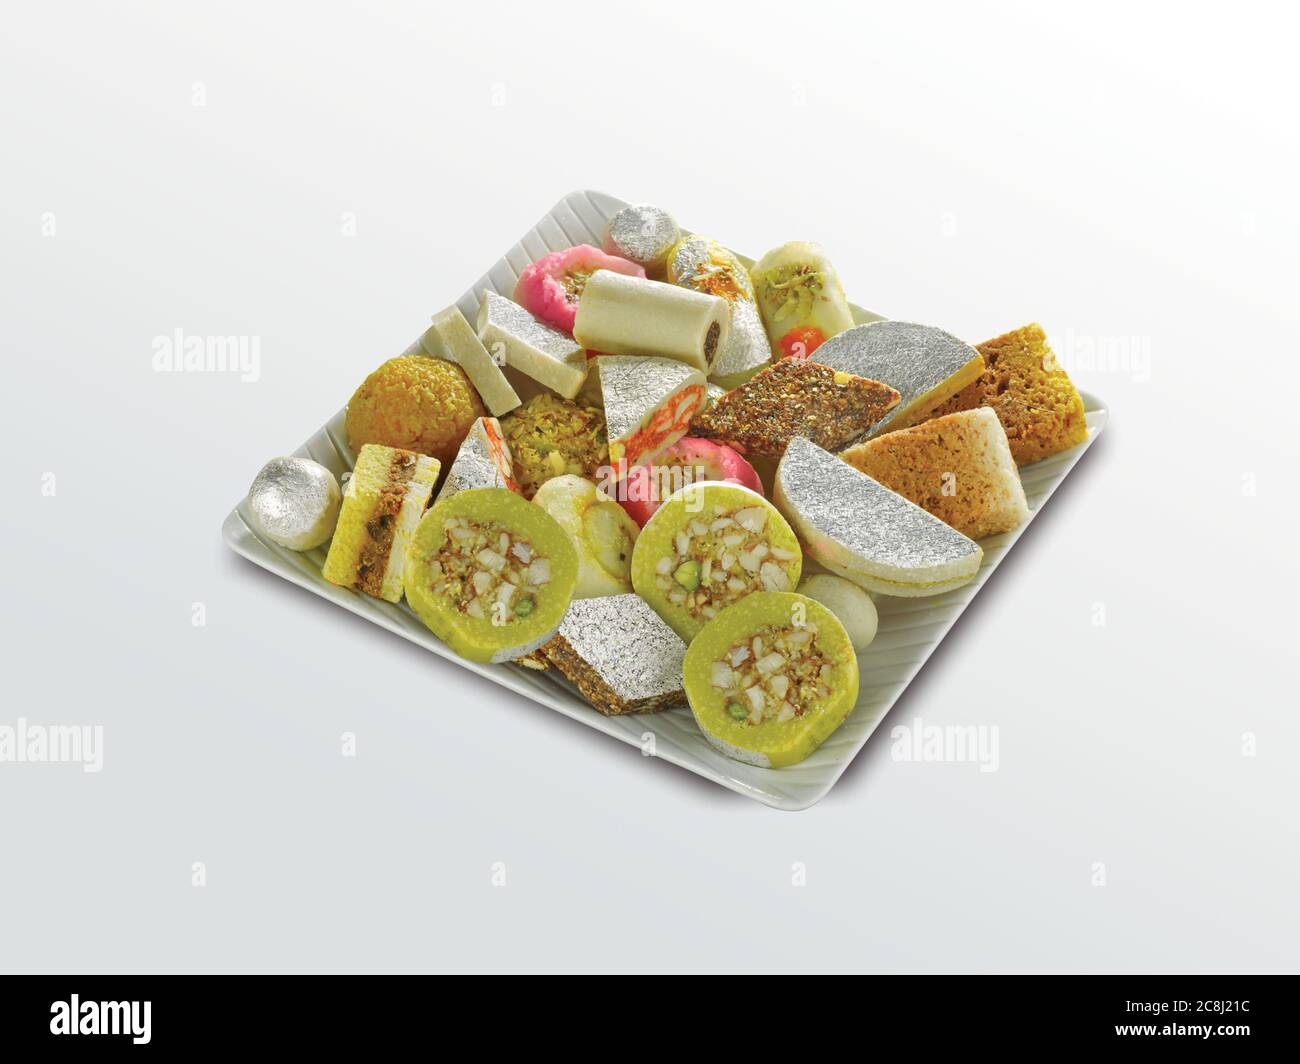 Stock photo of Indian sweets served in silver or wooden plate. variety of Peda, burfi, laddu in decorative plate, selective focus Stock Photo